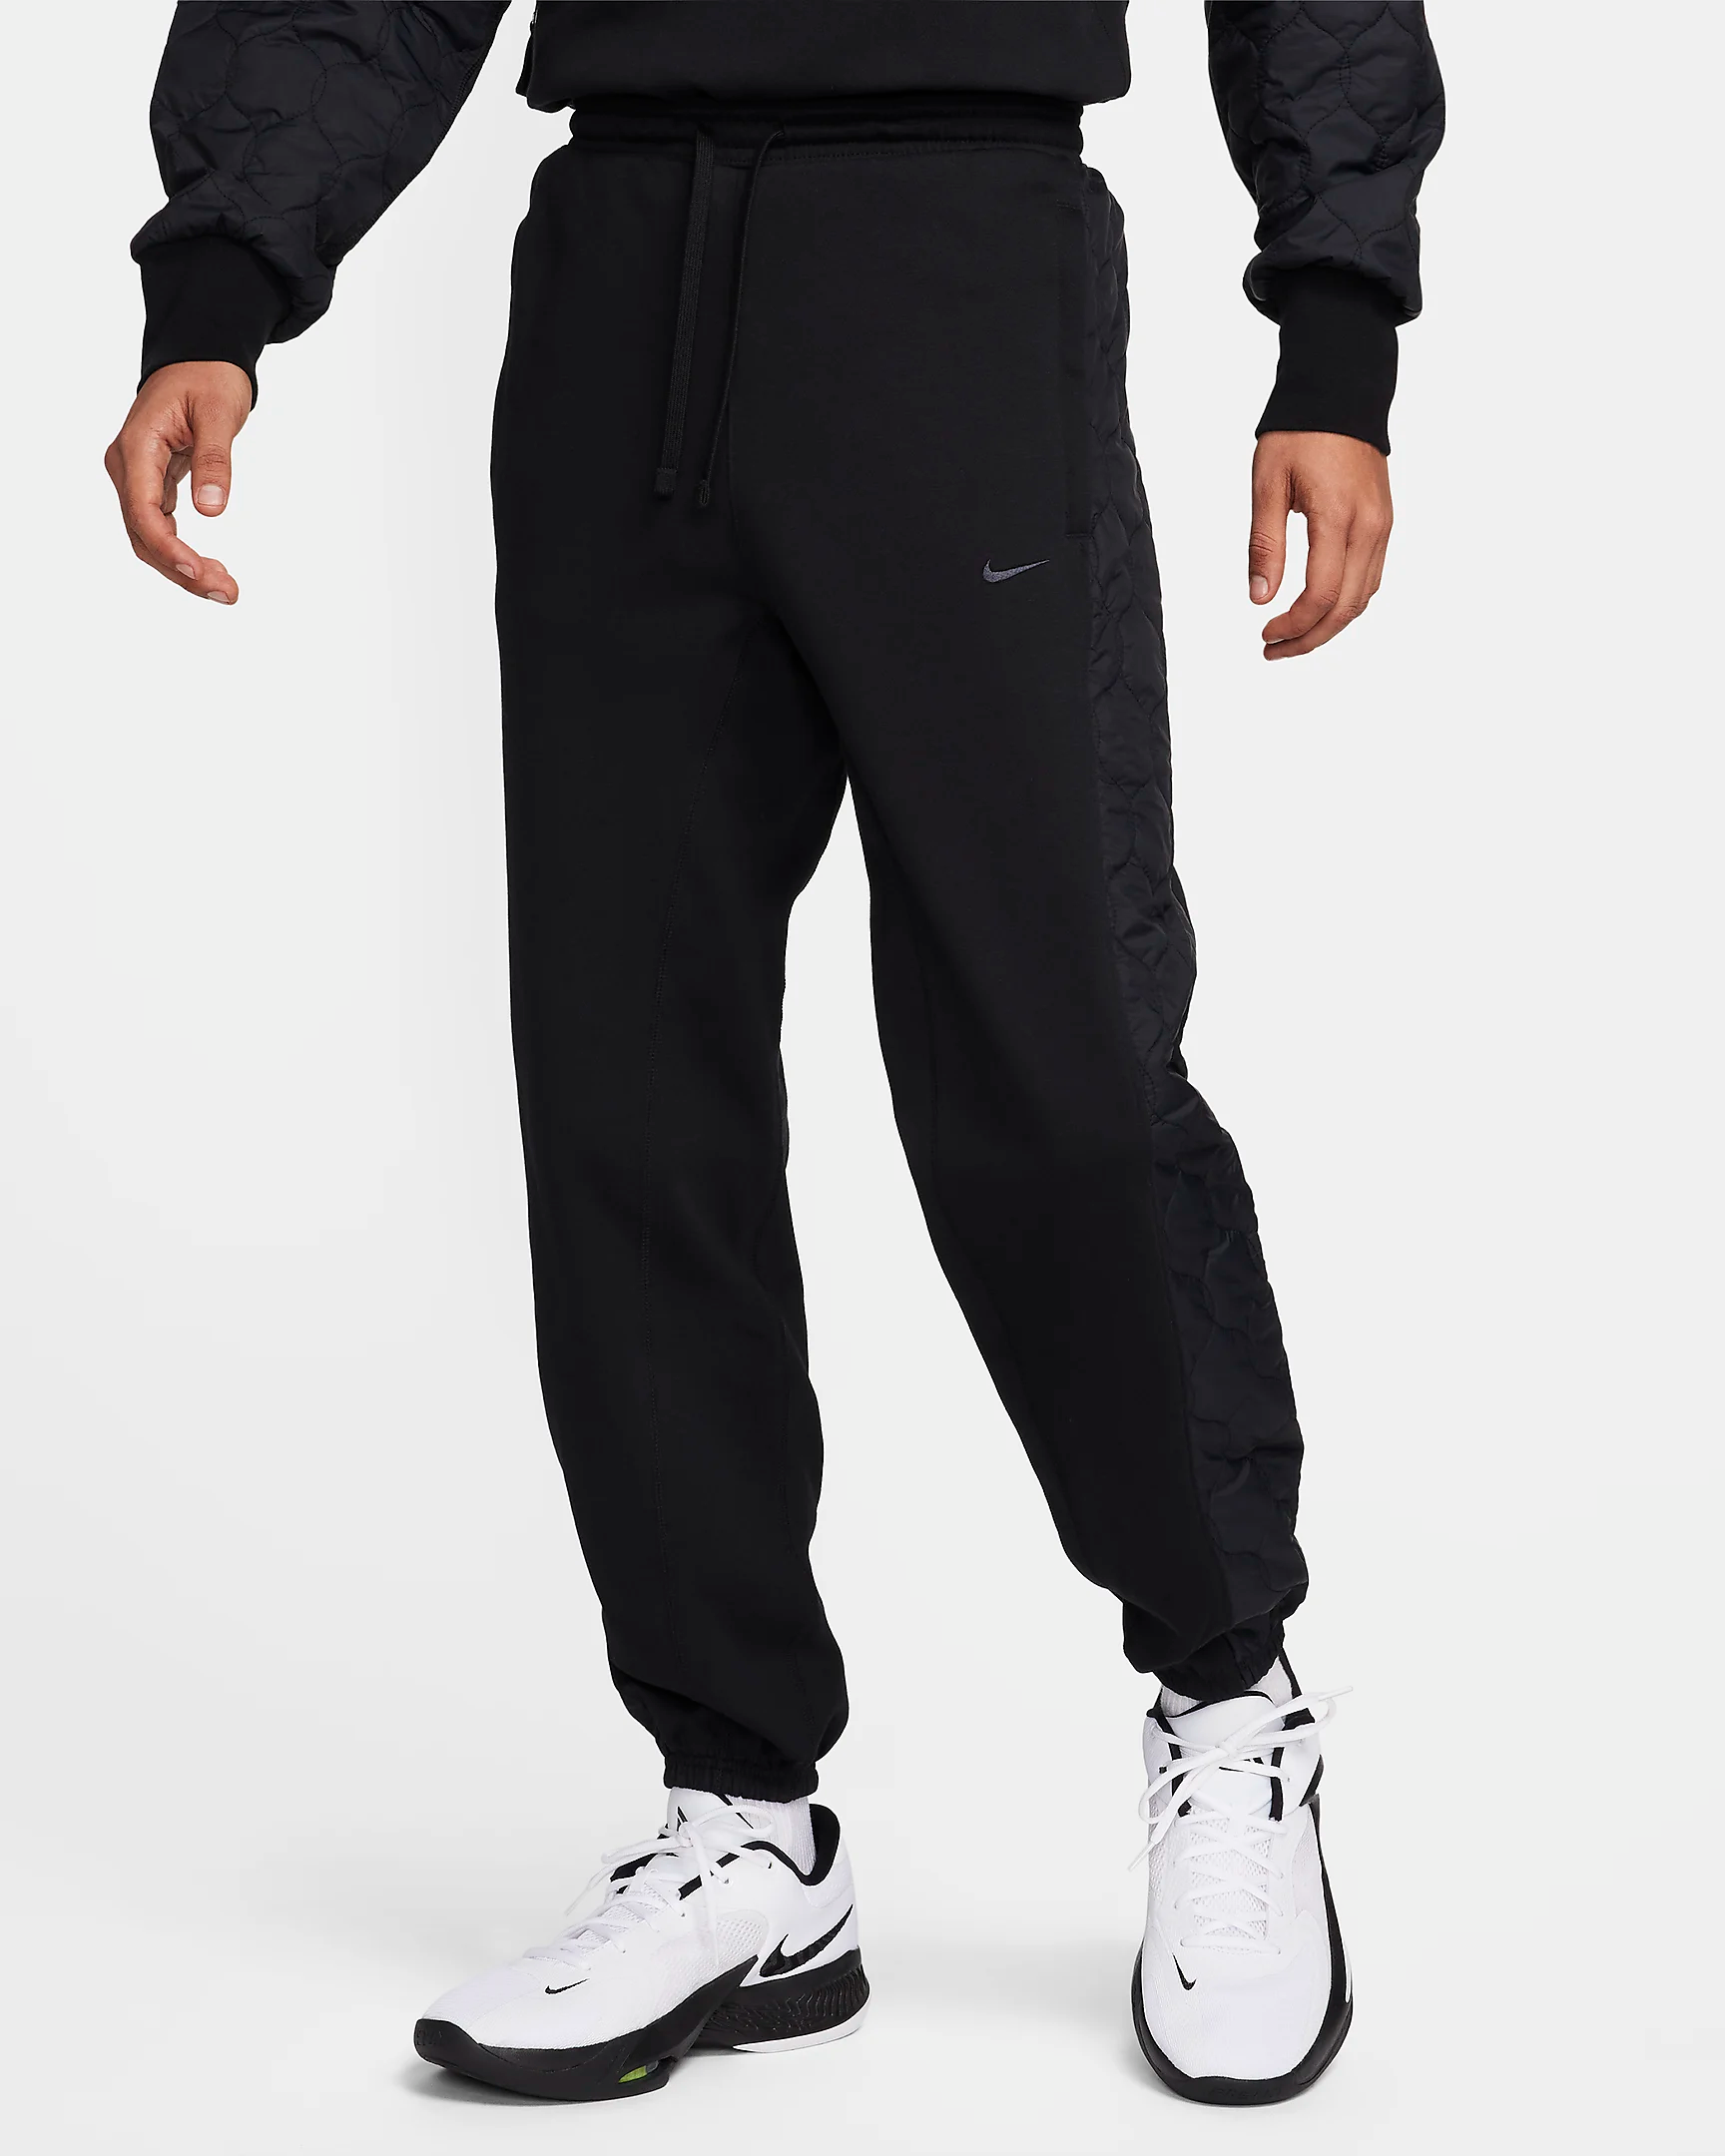 standard-issue-mens-basketball-pants-vPKMnl.png